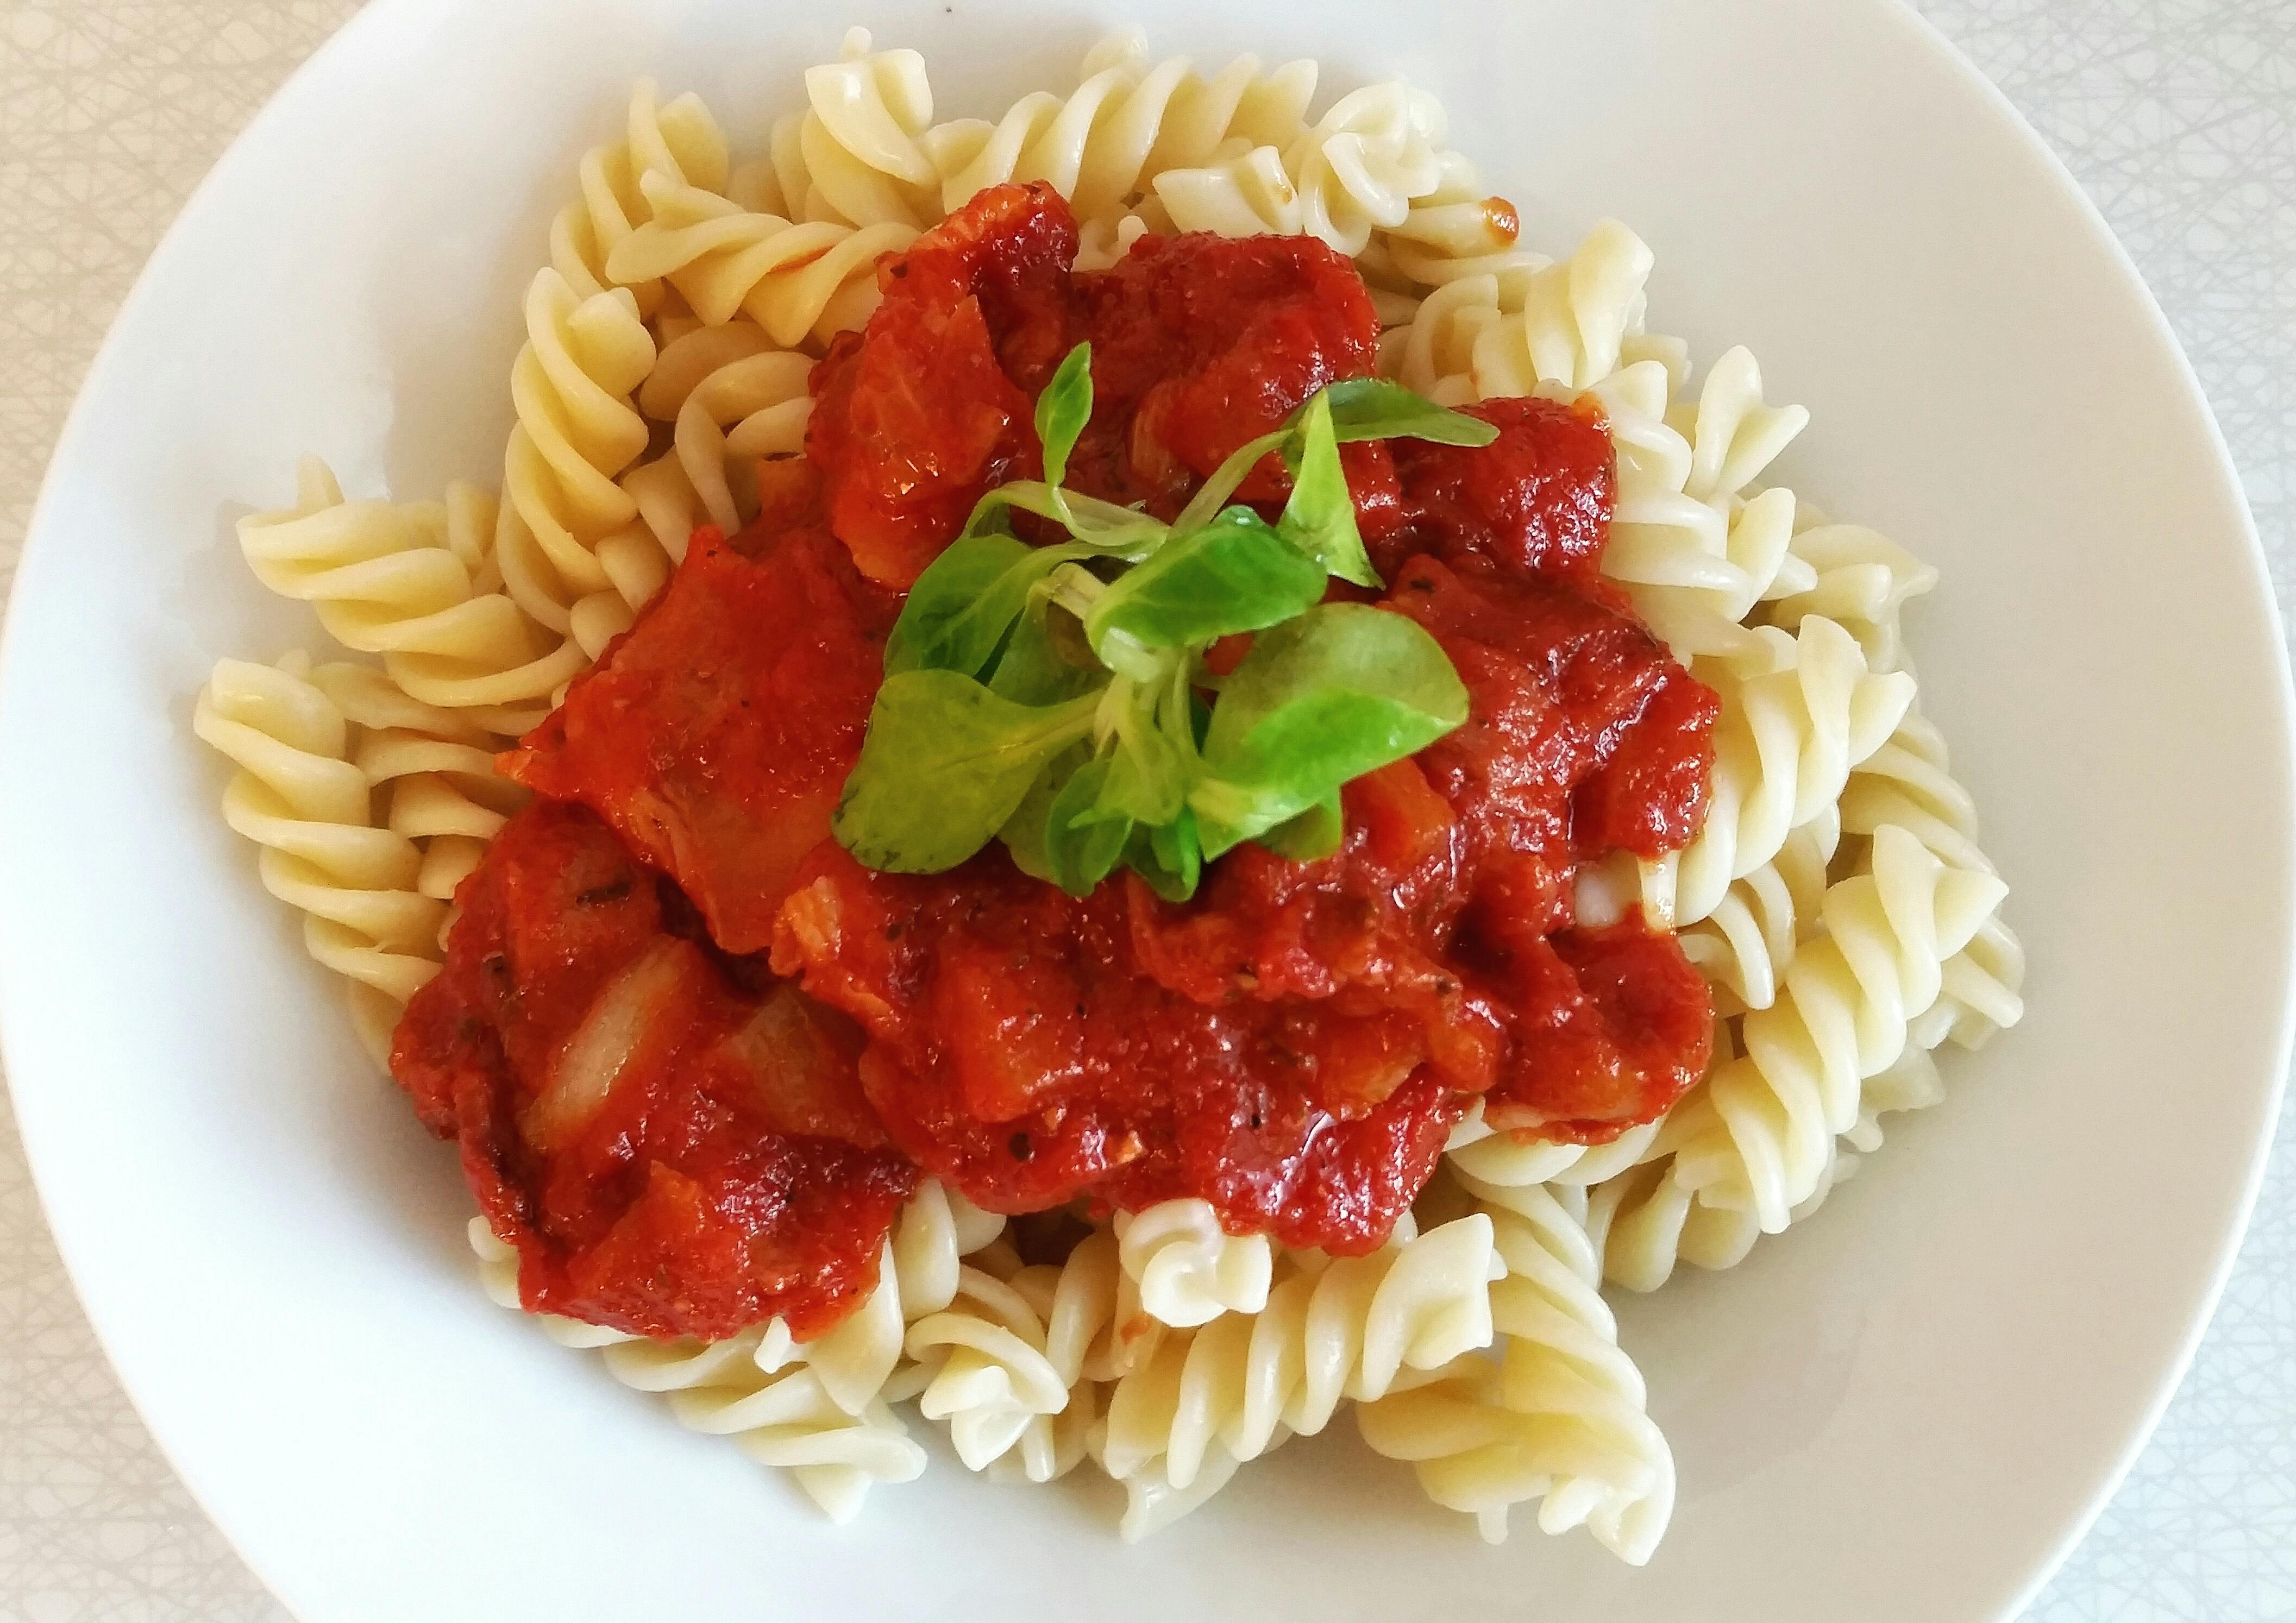 Pasta With Sauce in the Plate · Free Stock Photo